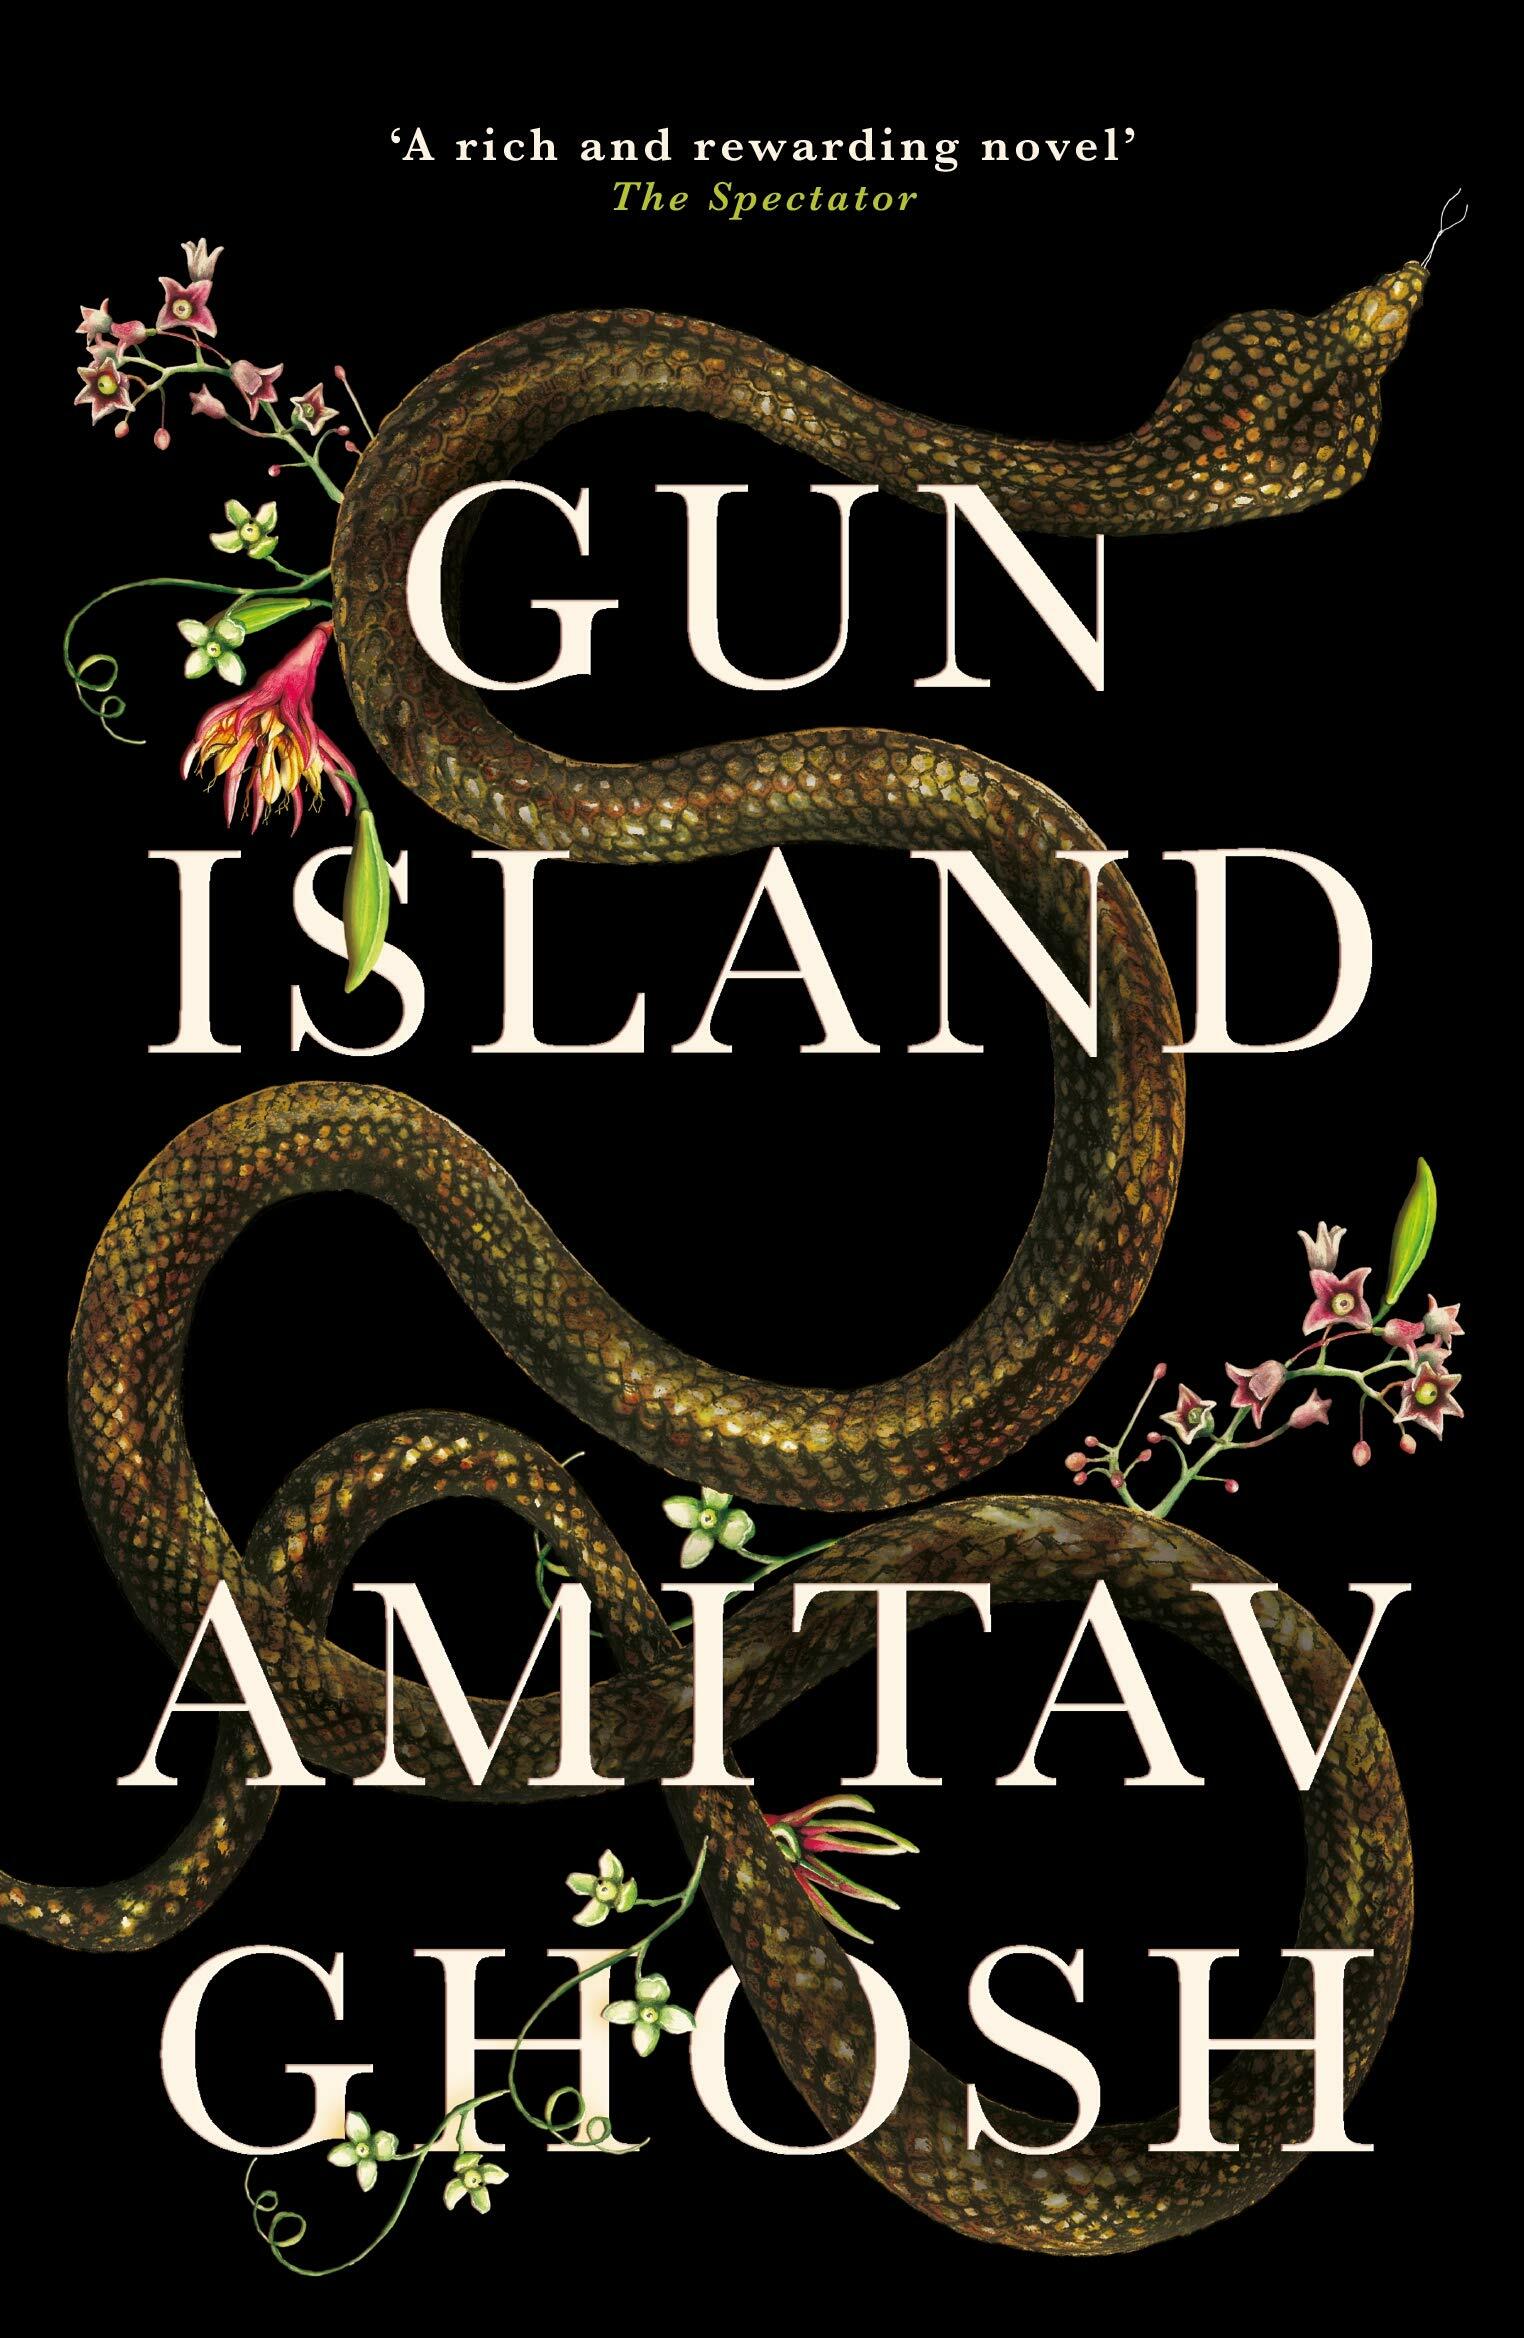 Gun Island : A spellbinding, globe-trotting novel by the bestselling author of the Ibis trilogy (Paperback)